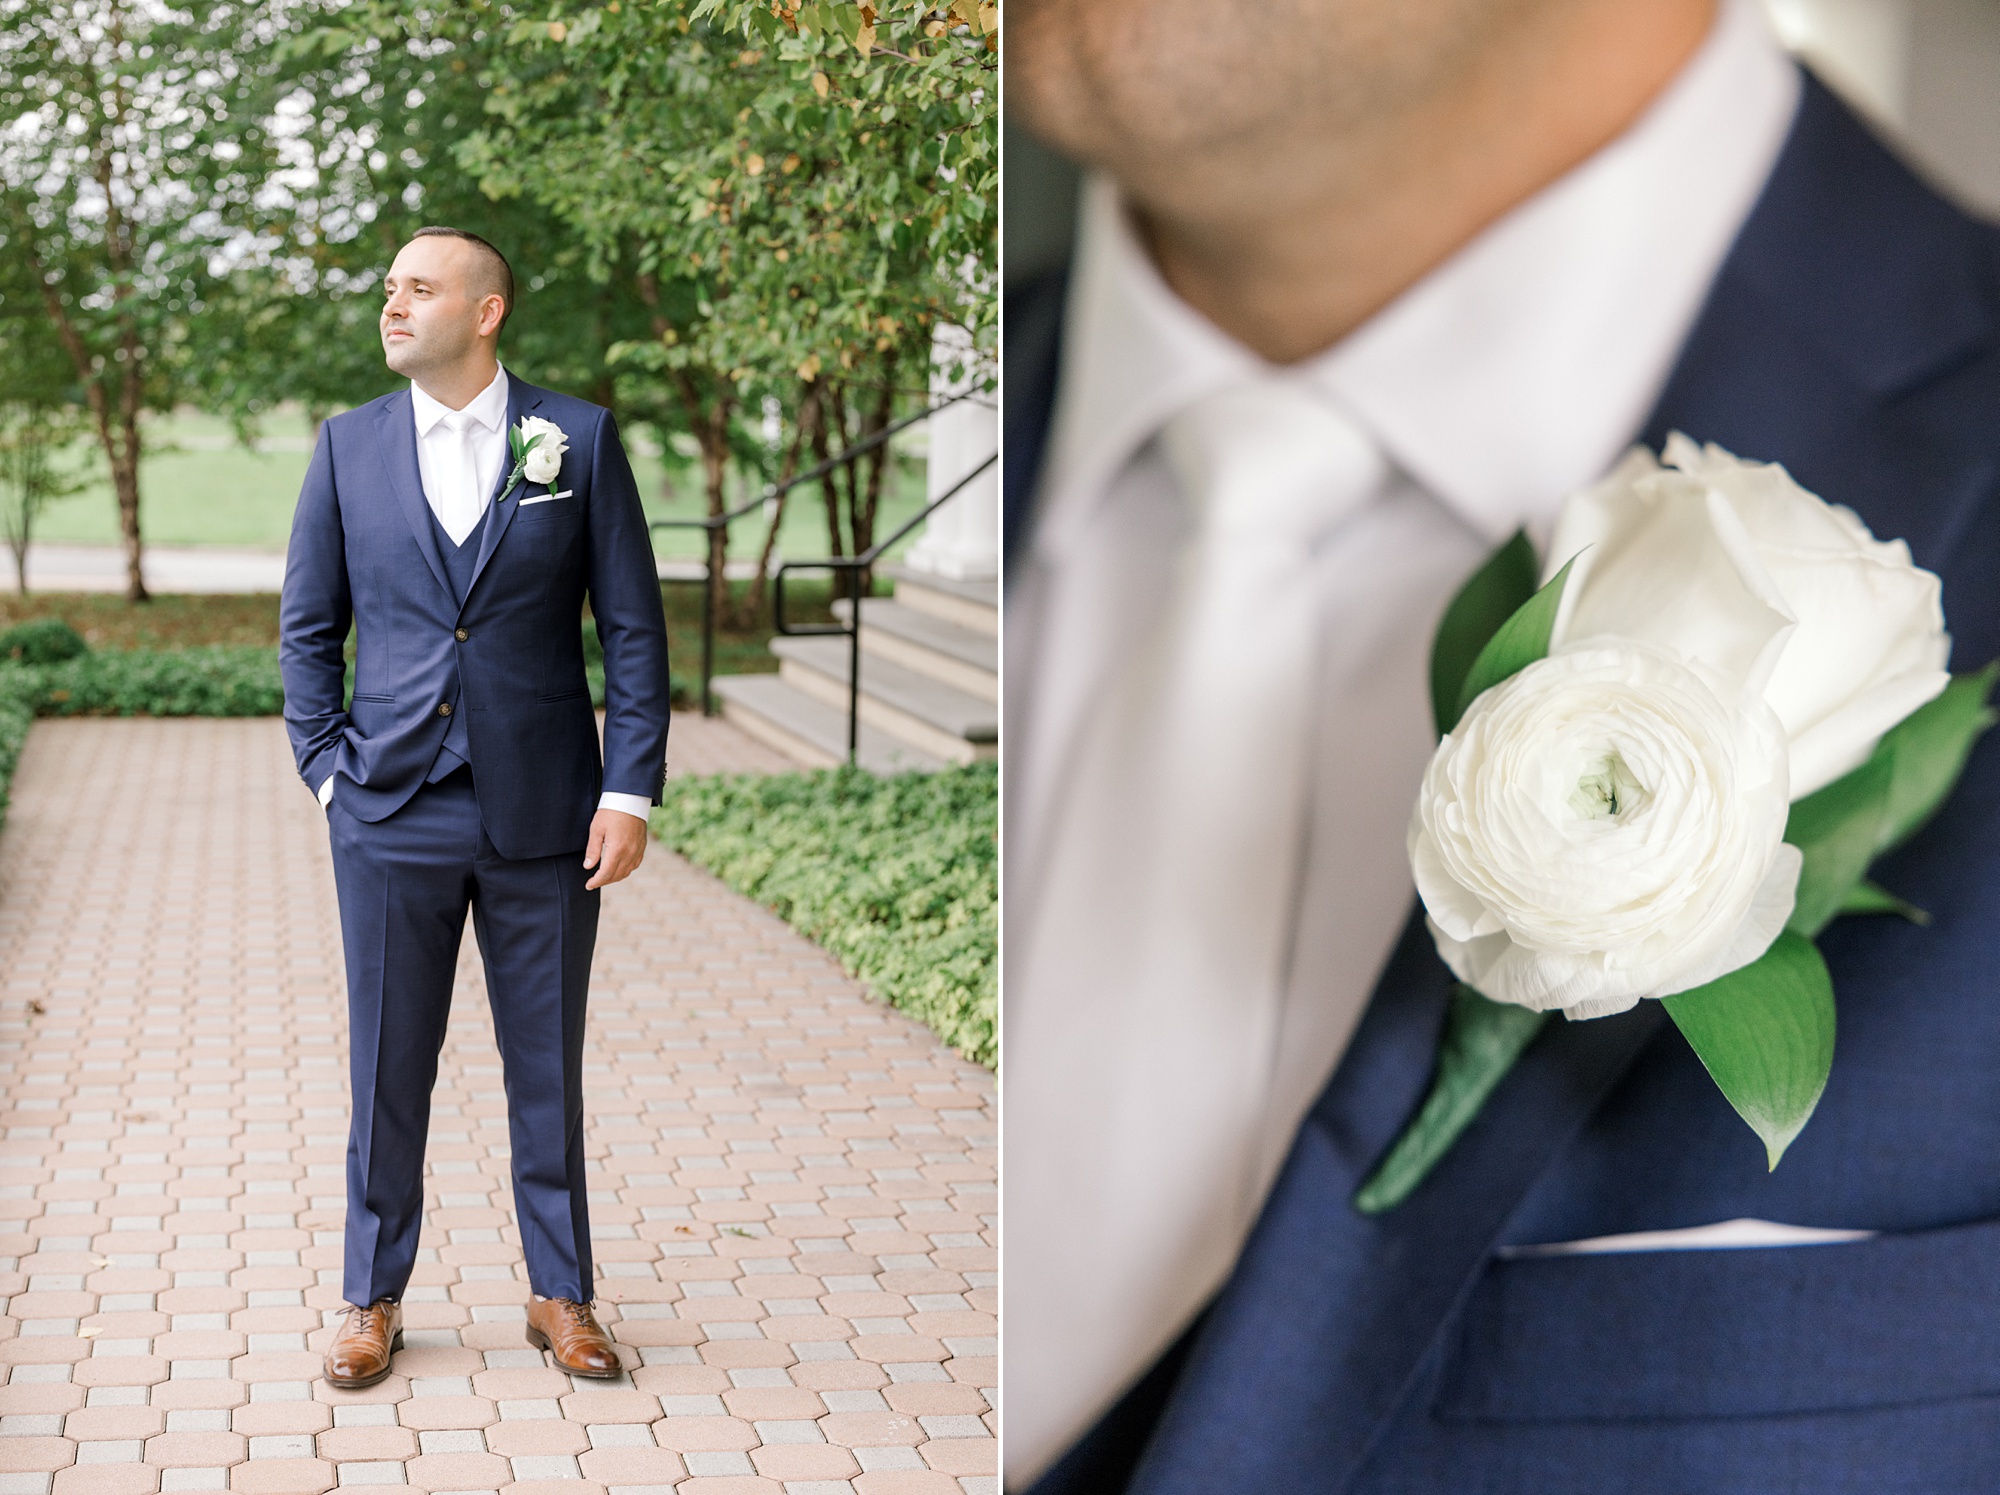 groom poses in navy suit with white rose boutonnière